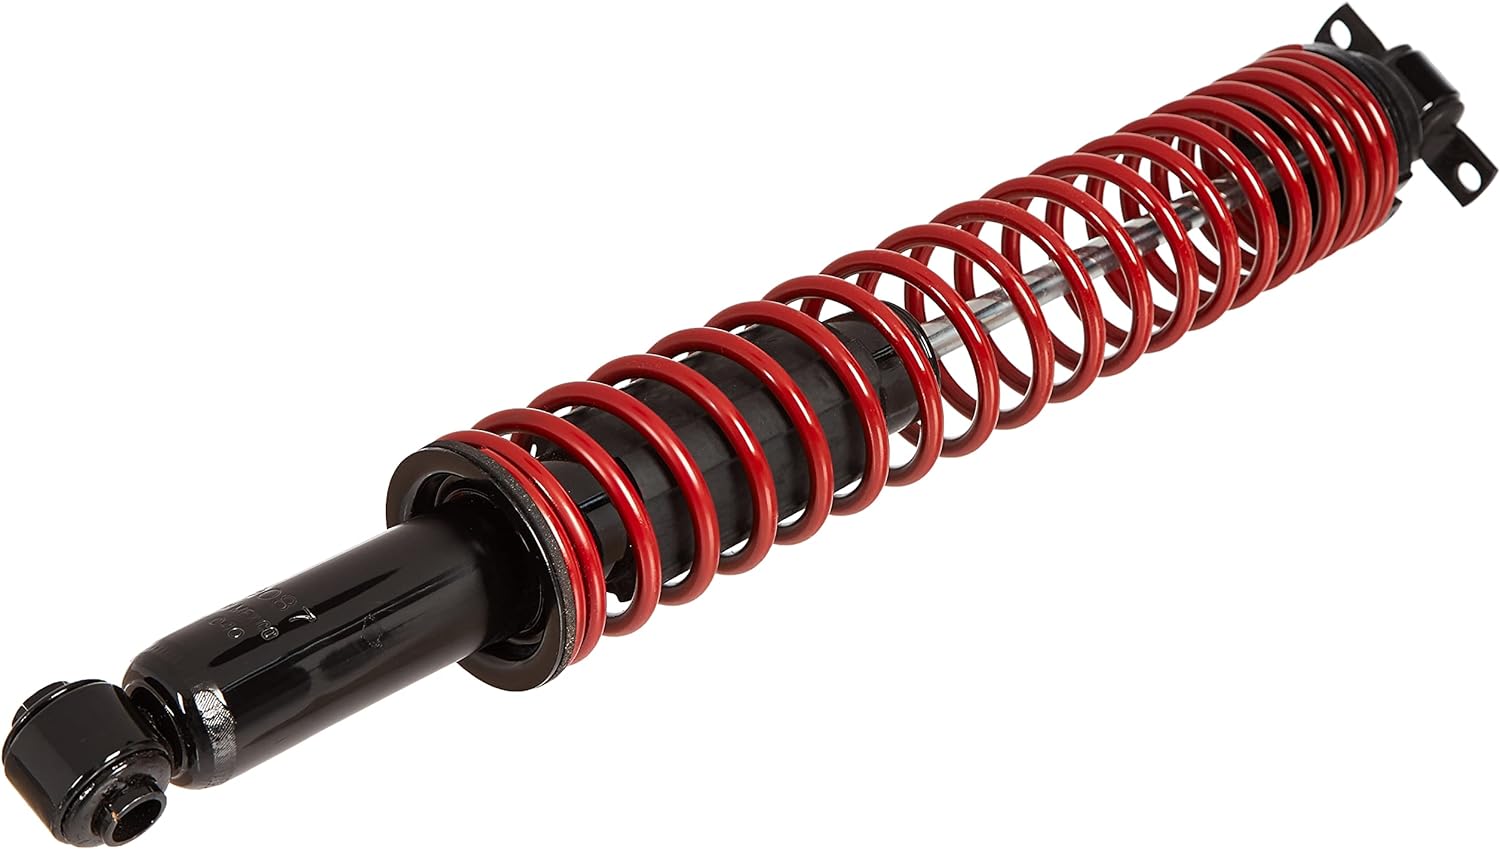 Need New Shocks For Your 2024 Chevy HHR: 10 Tips For Replacing Struts And Shocks On The HHR